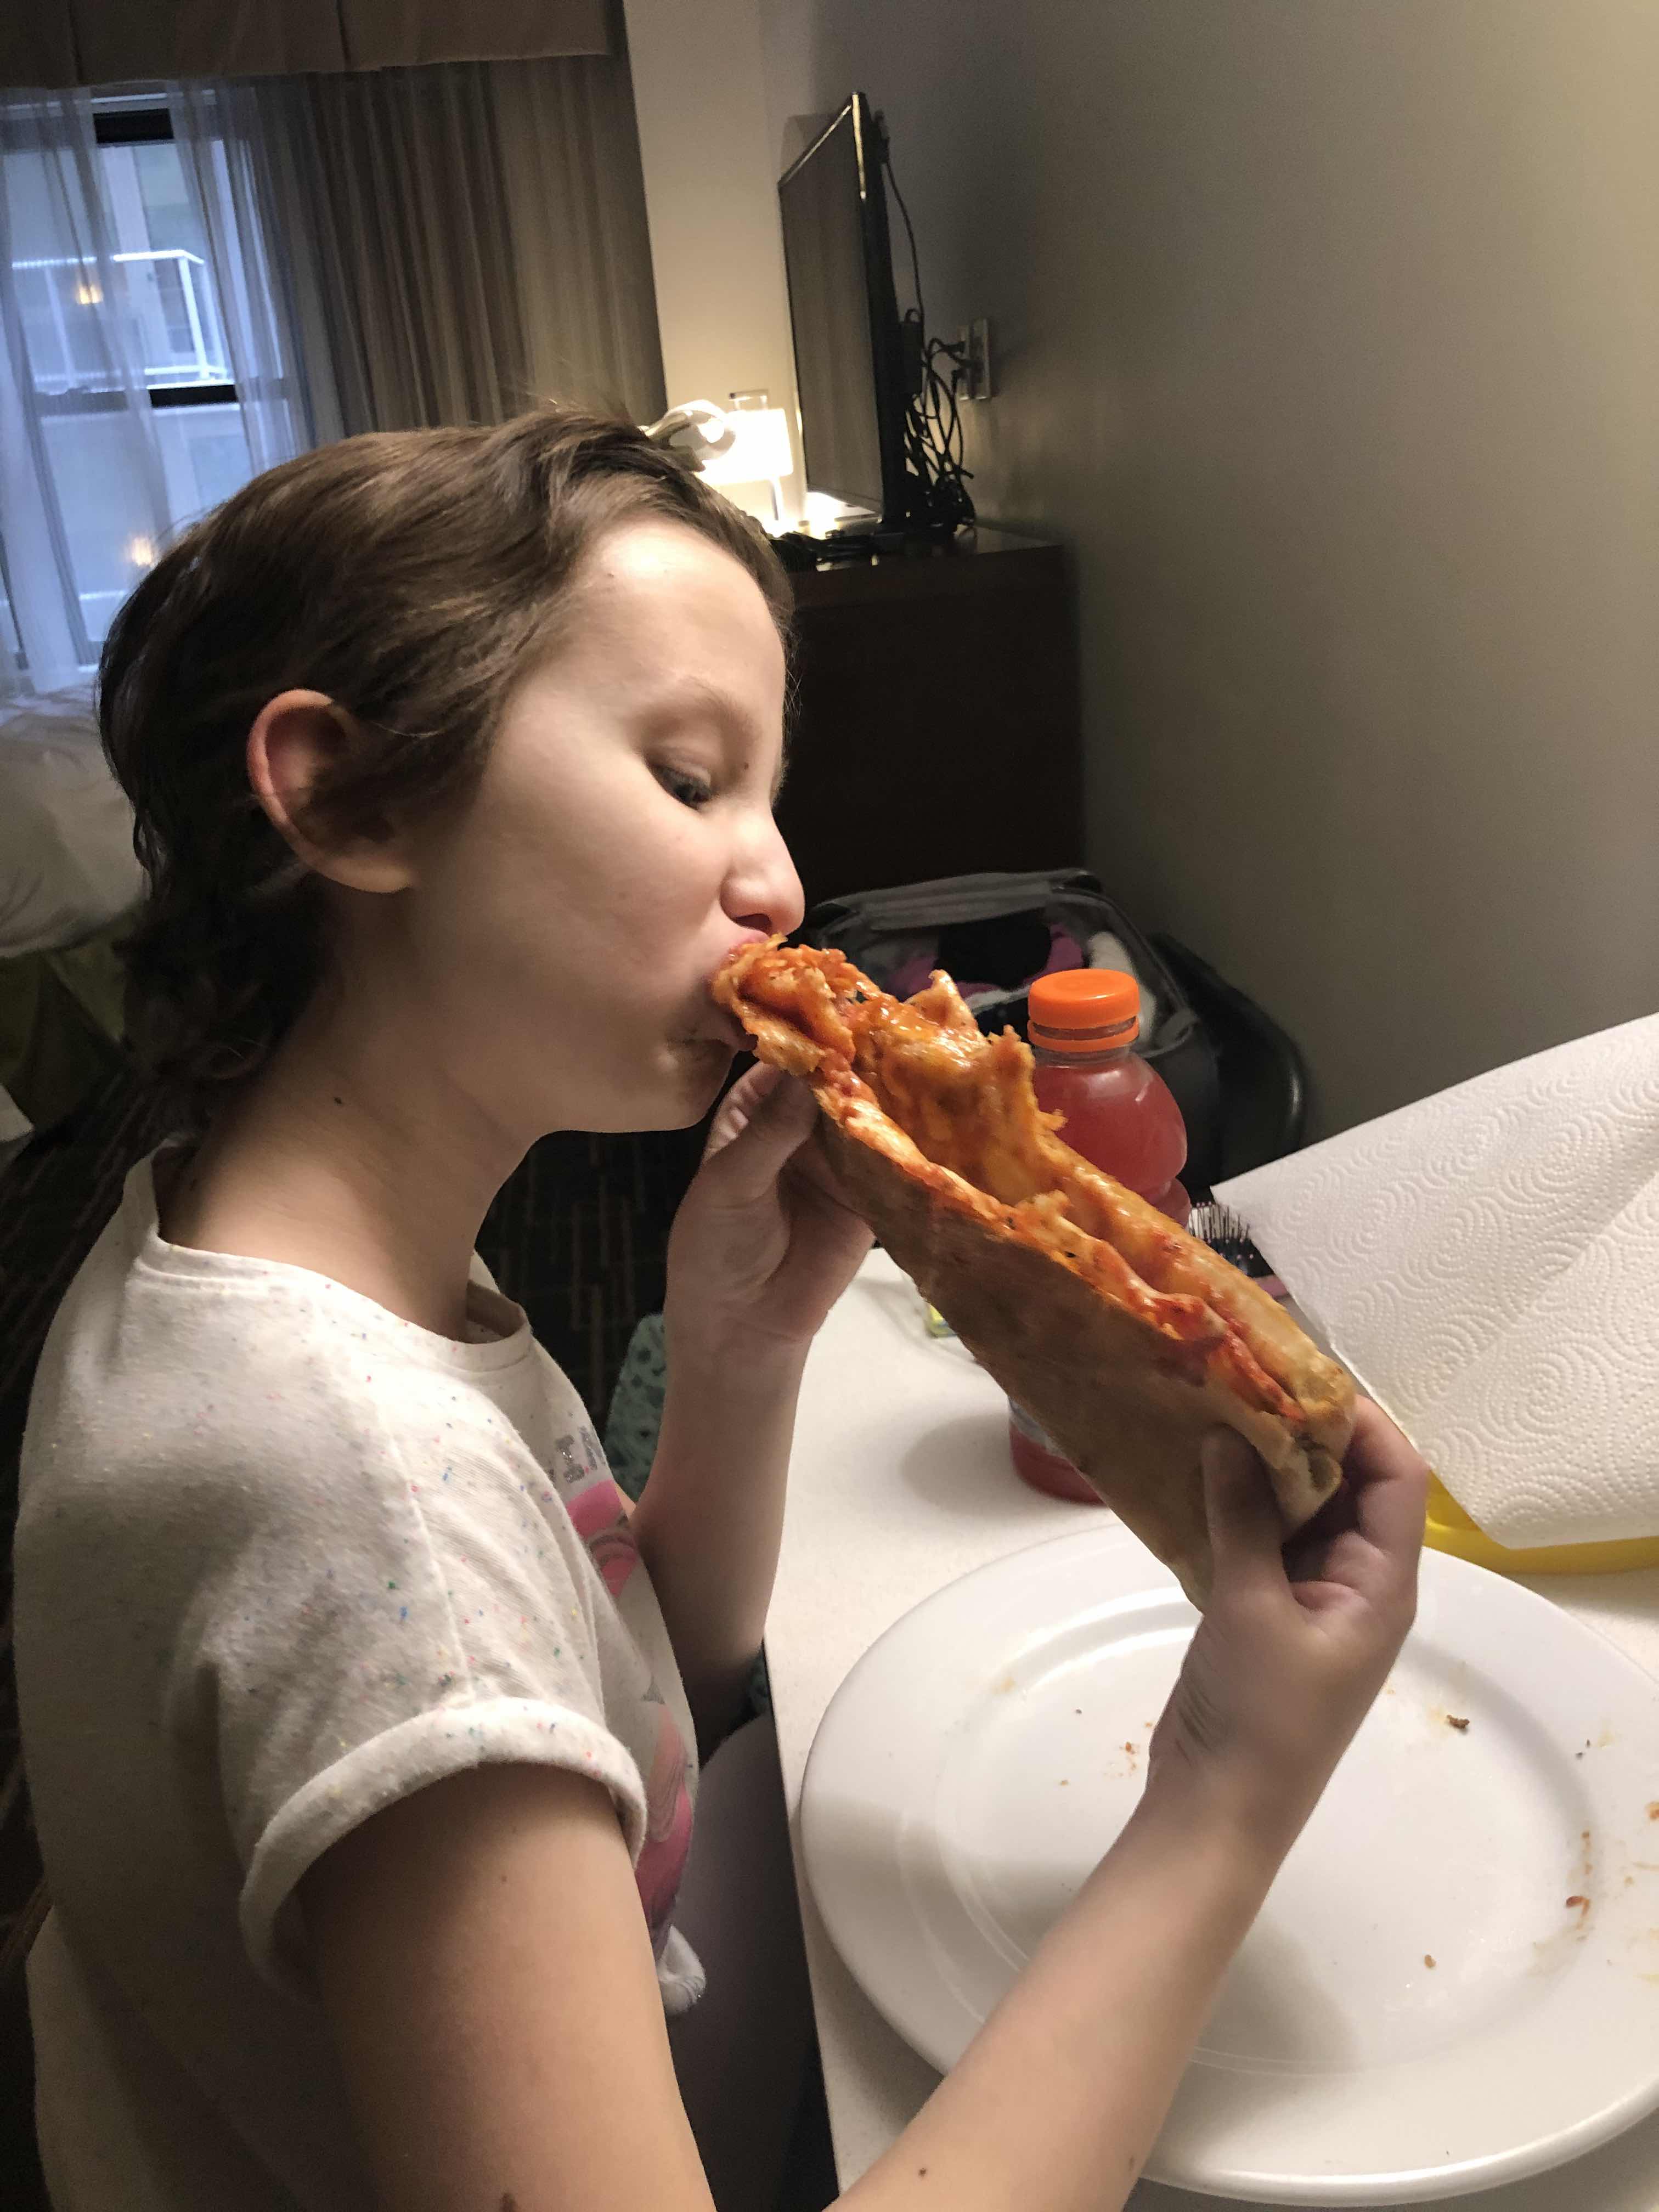 Eating pizza like a true New Yorker!